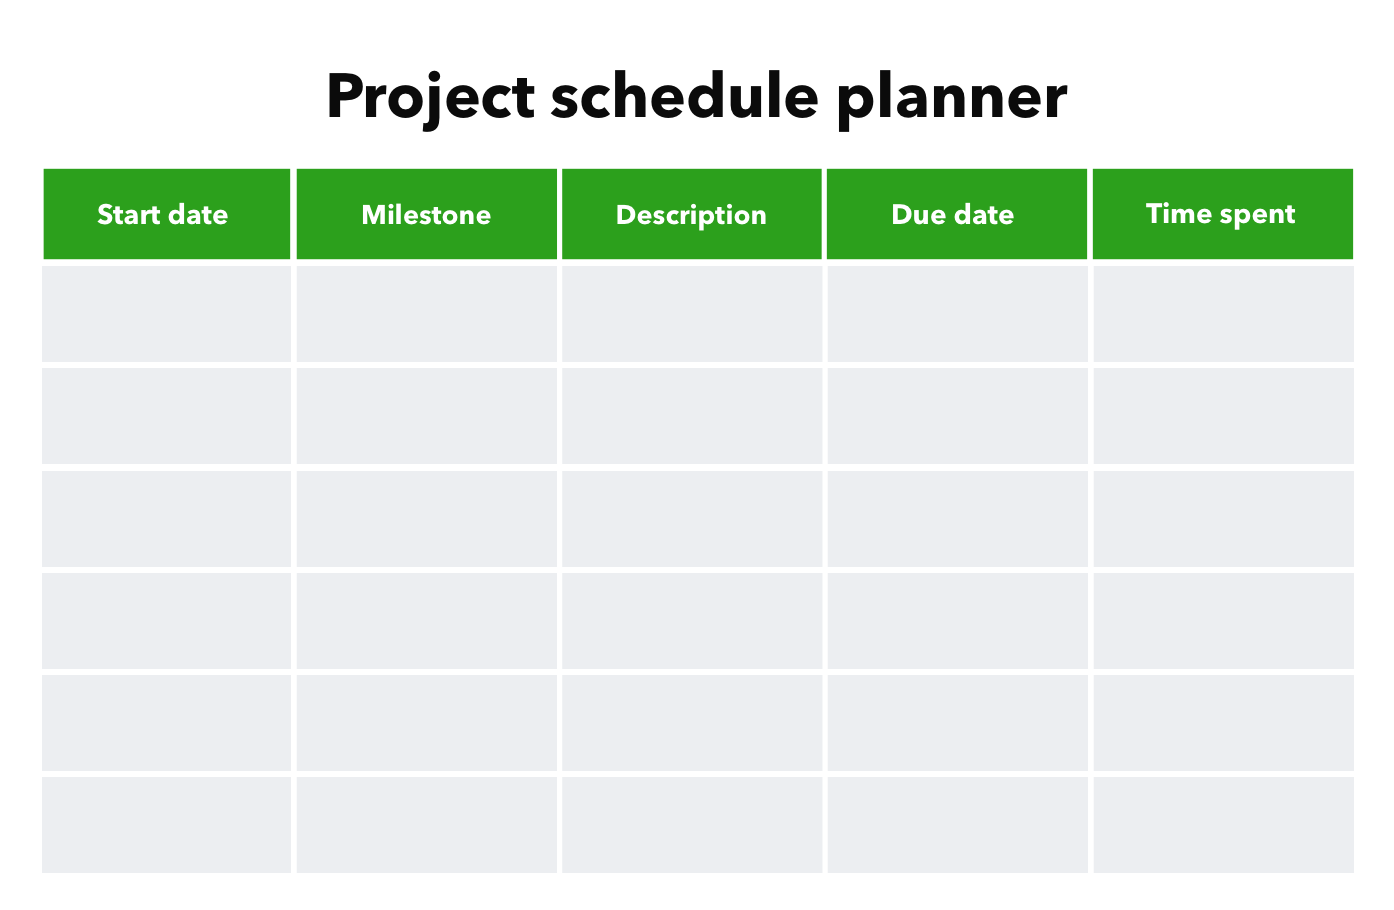 Project schedule planner